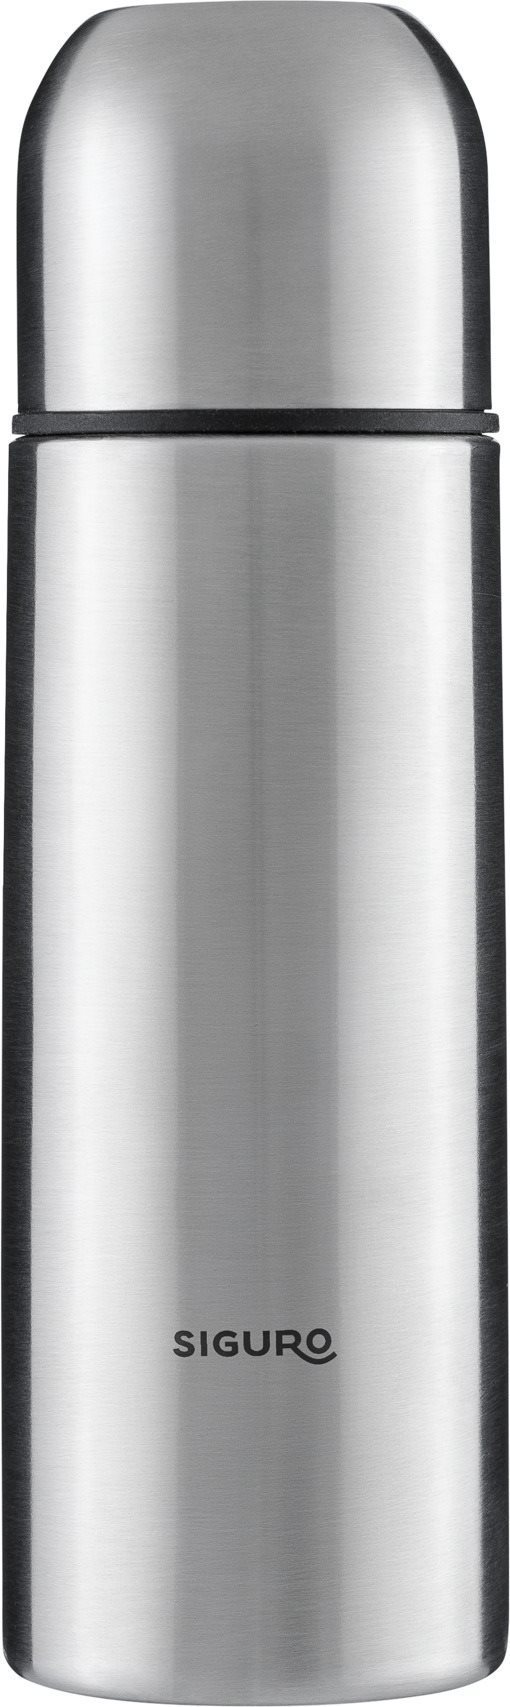 Siguro TH-D17 Thermos Essentials Stainless Steel